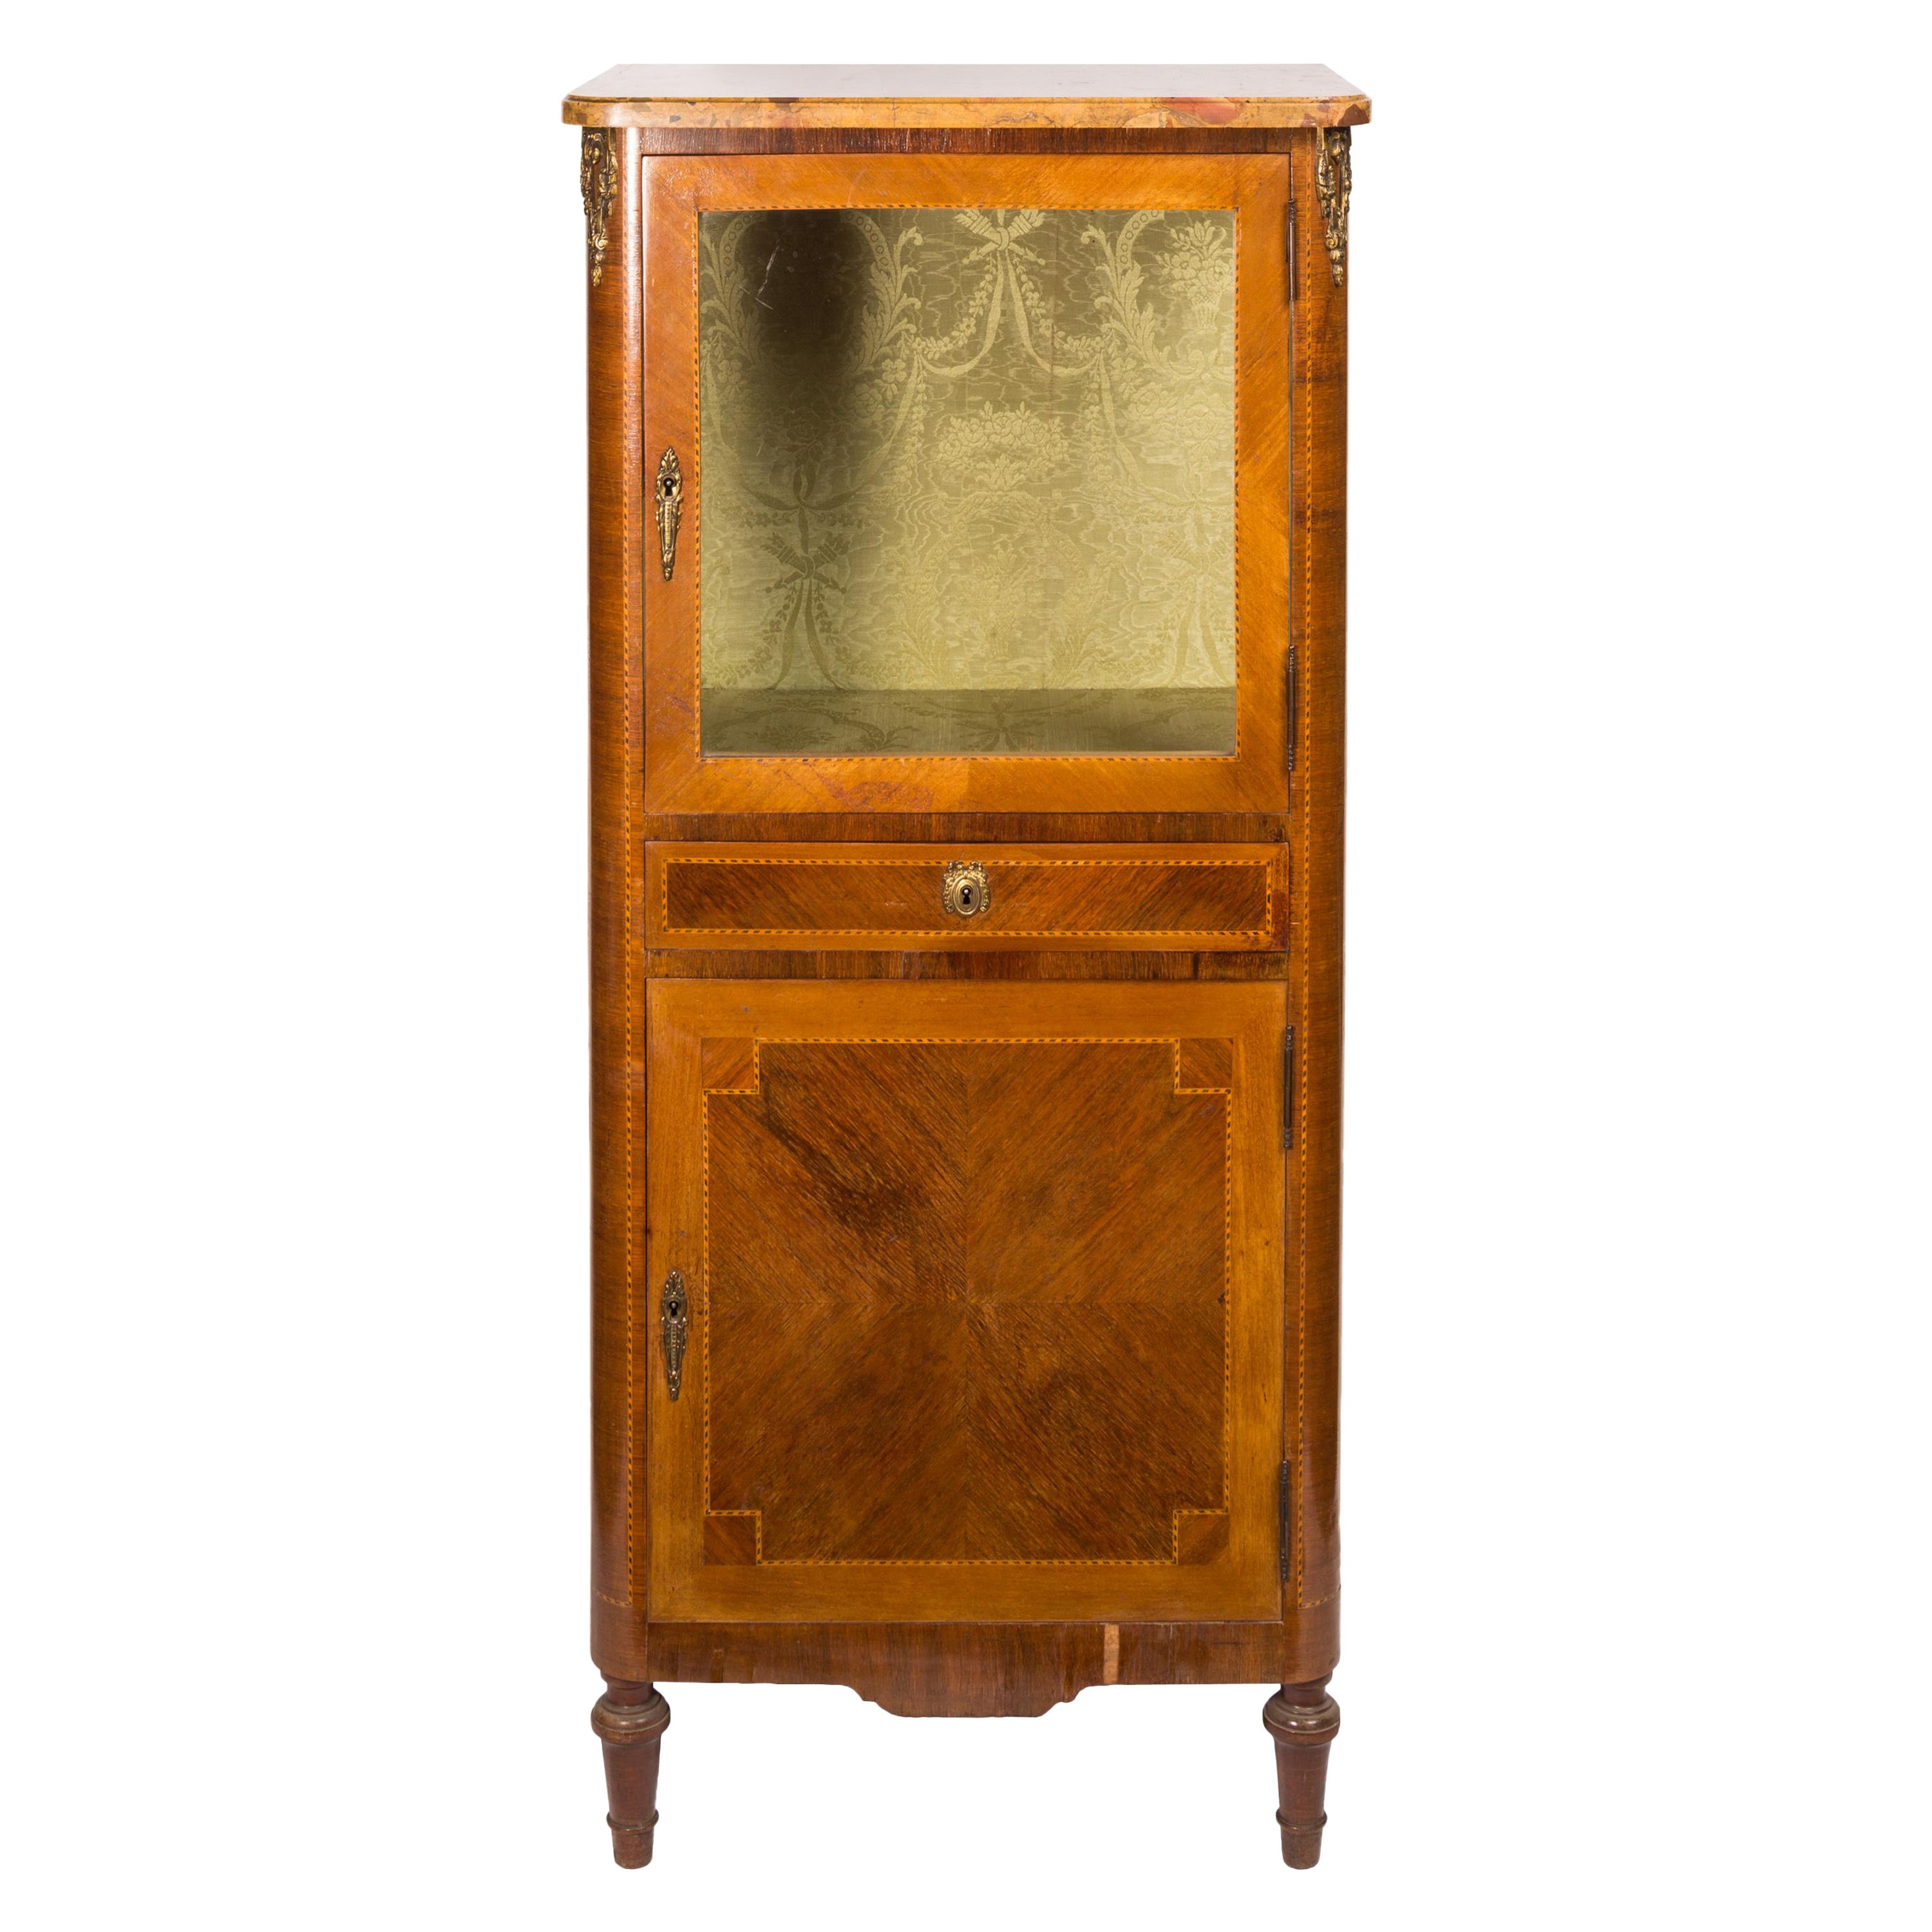 Small Louis XVI Style Vitrine with Marquetry, Ormolu Hardware and Marble Top For Sale